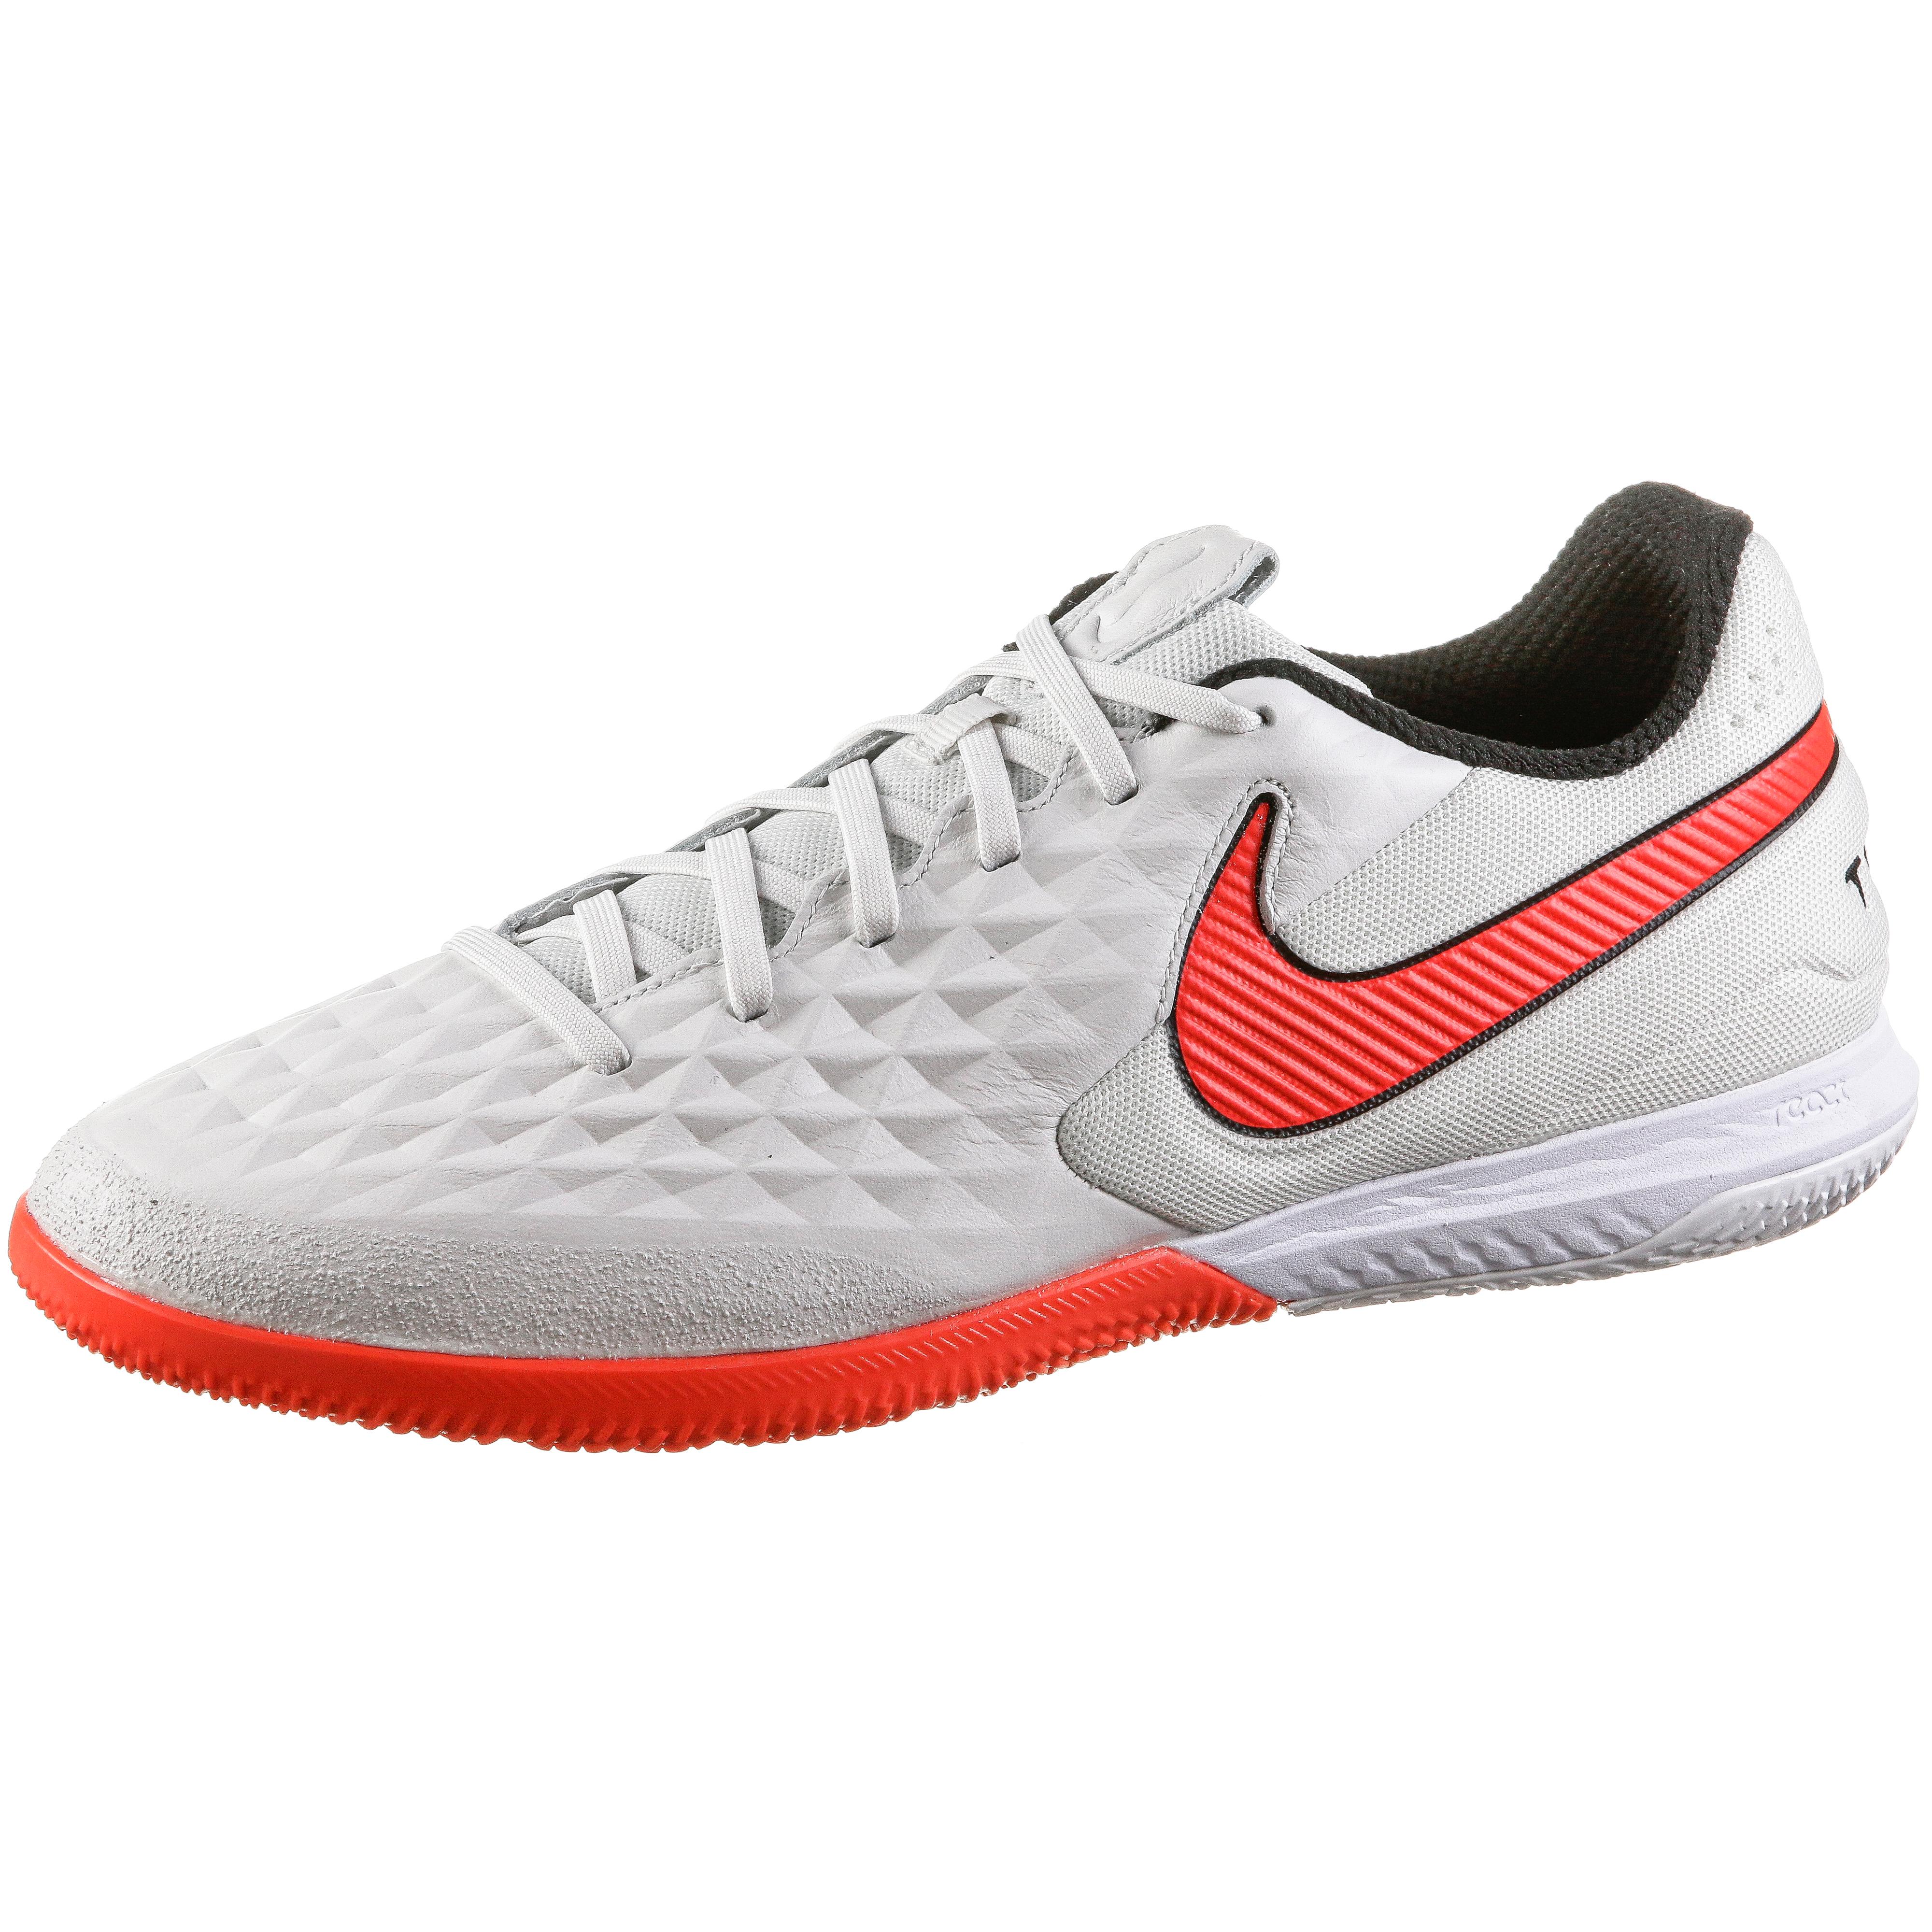 Nike Tiempo Legend 8 Academy Anti Clog Soft. Lovell rugby